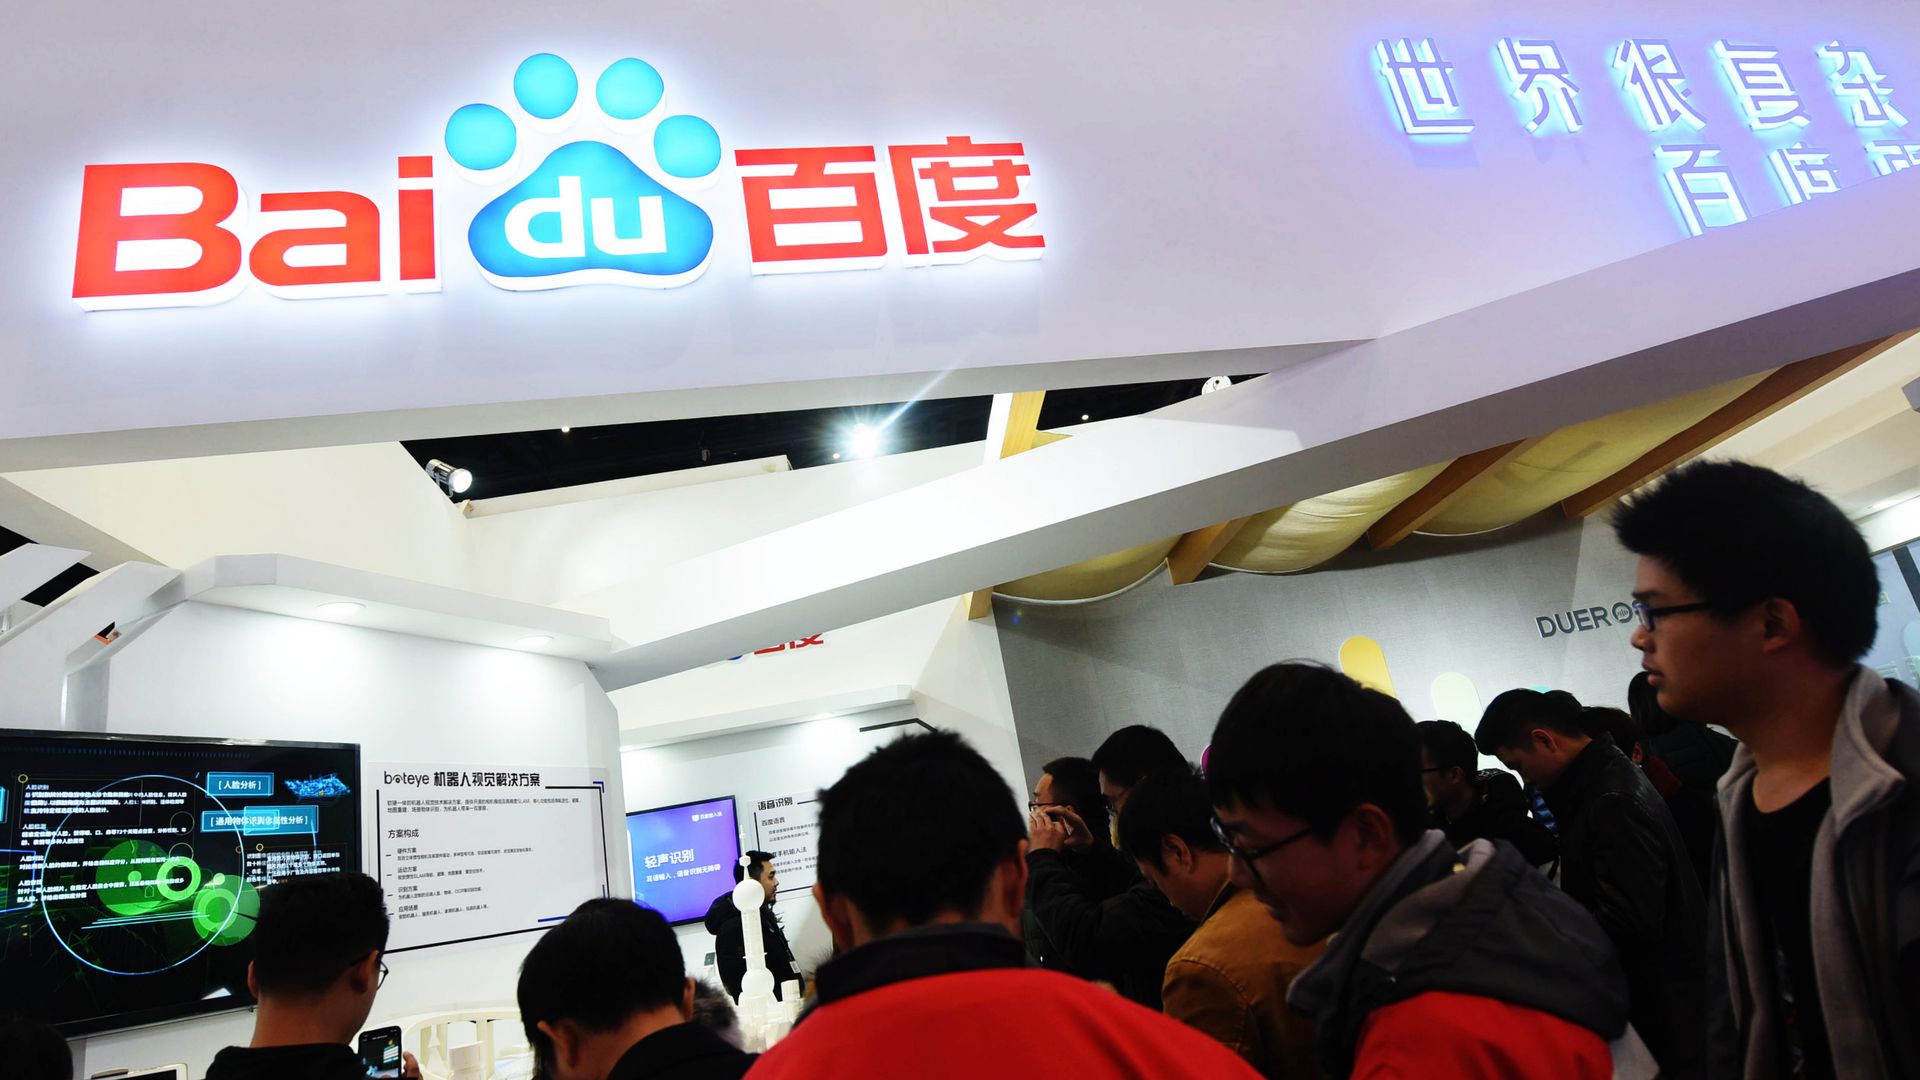 The Baidu booth at a Chinese trade show